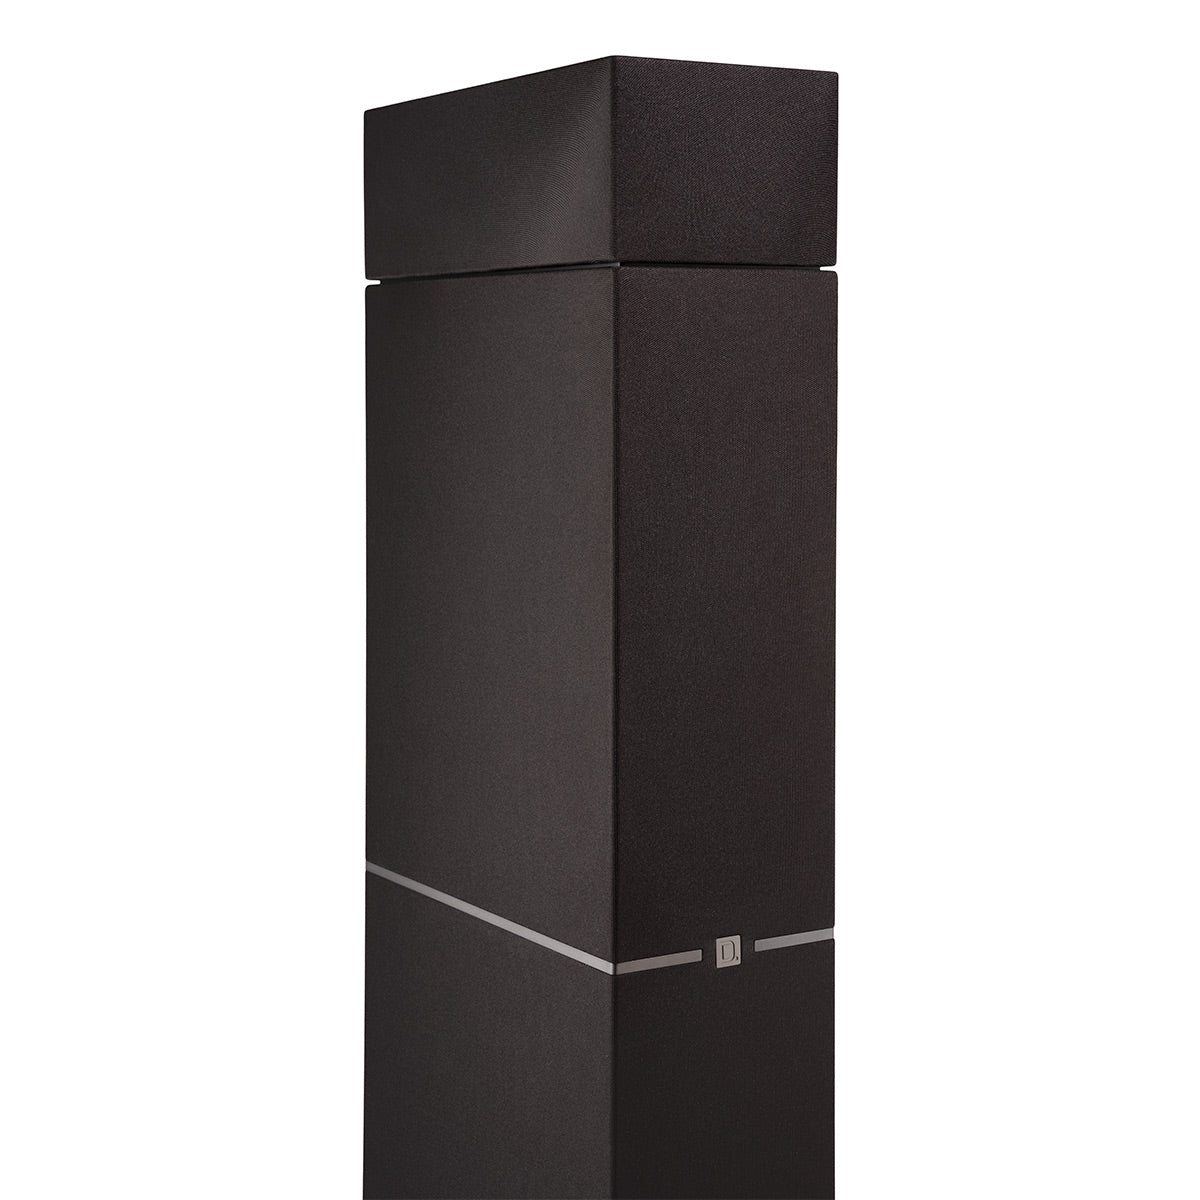 Definitive Technology Dymension DM90 Integrated Height Modules for DM80 and DM70 Speakers - Pair